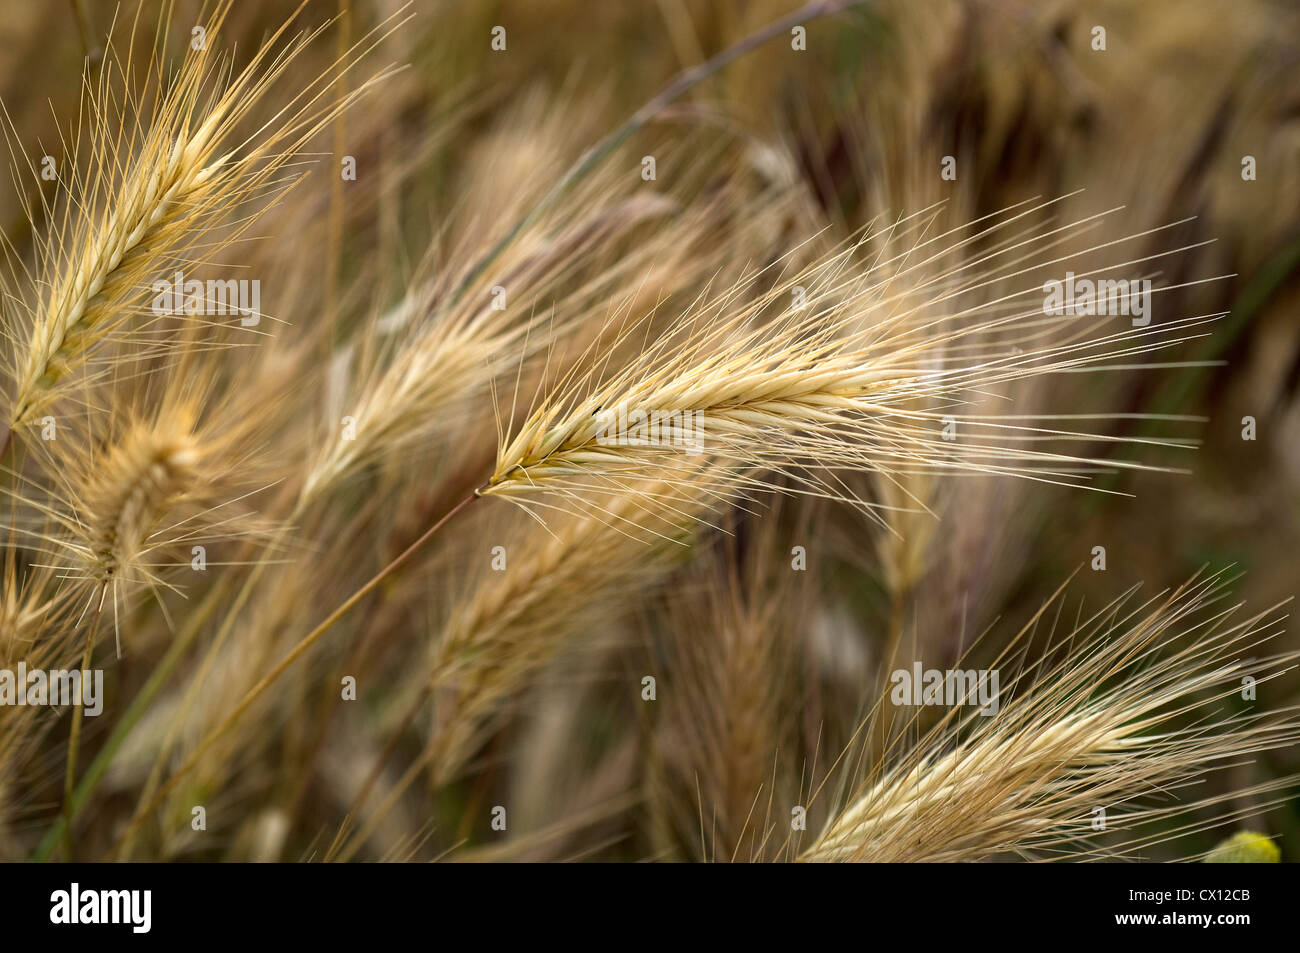 Ears of Wild Emmer (Triticum dicoccoides) Stock Photo